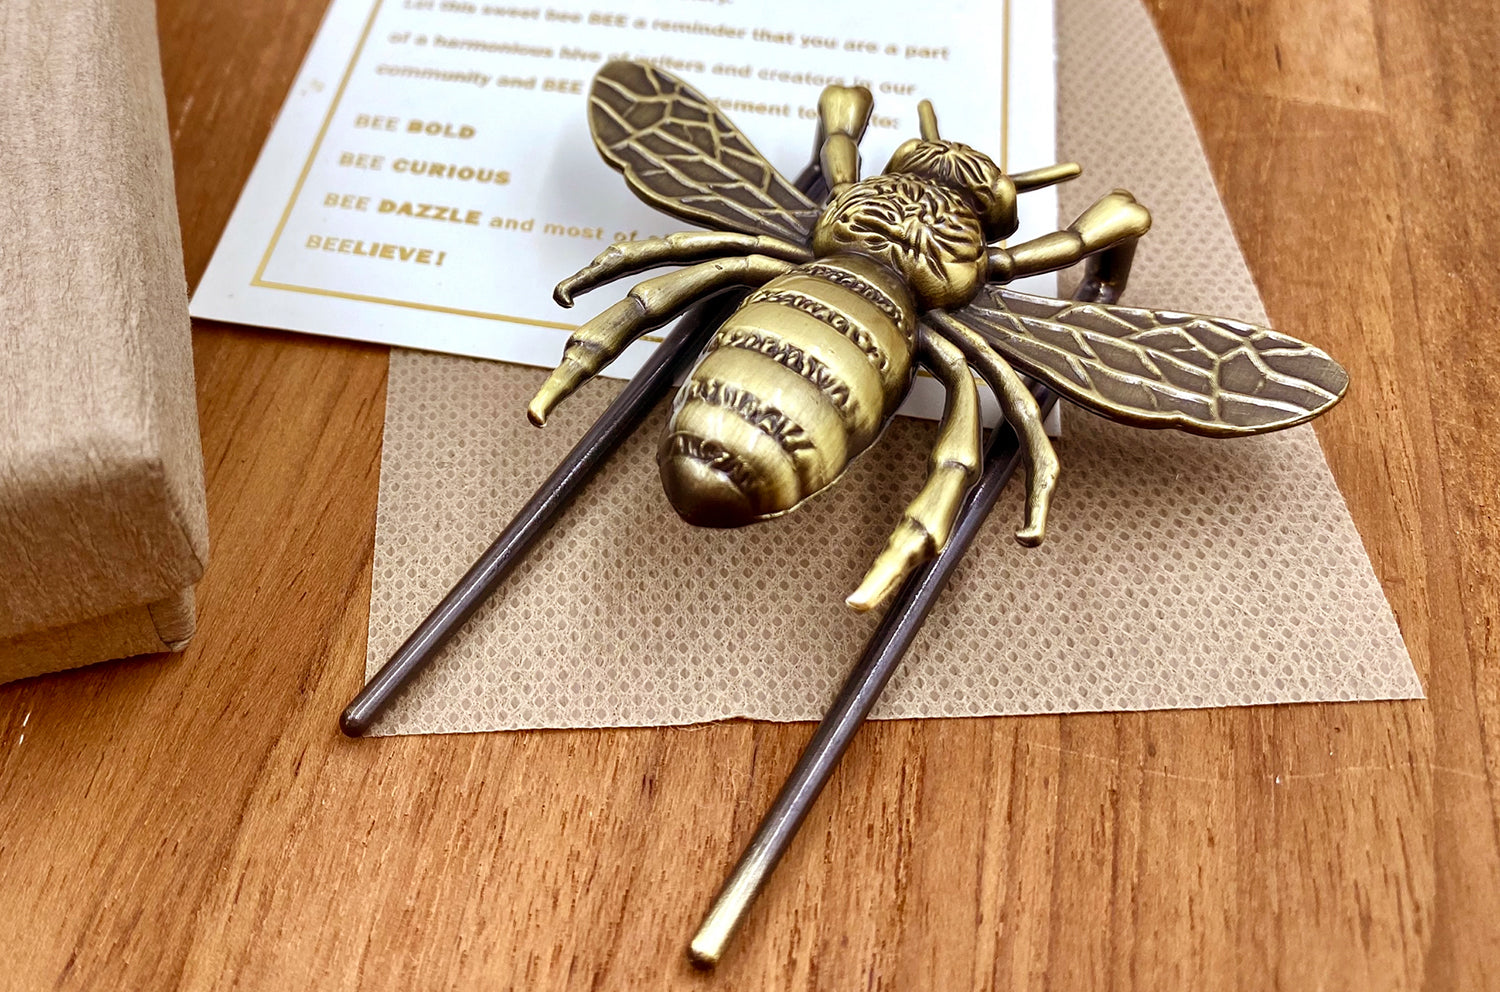 Esterbrook Bee Page Holder - Brass